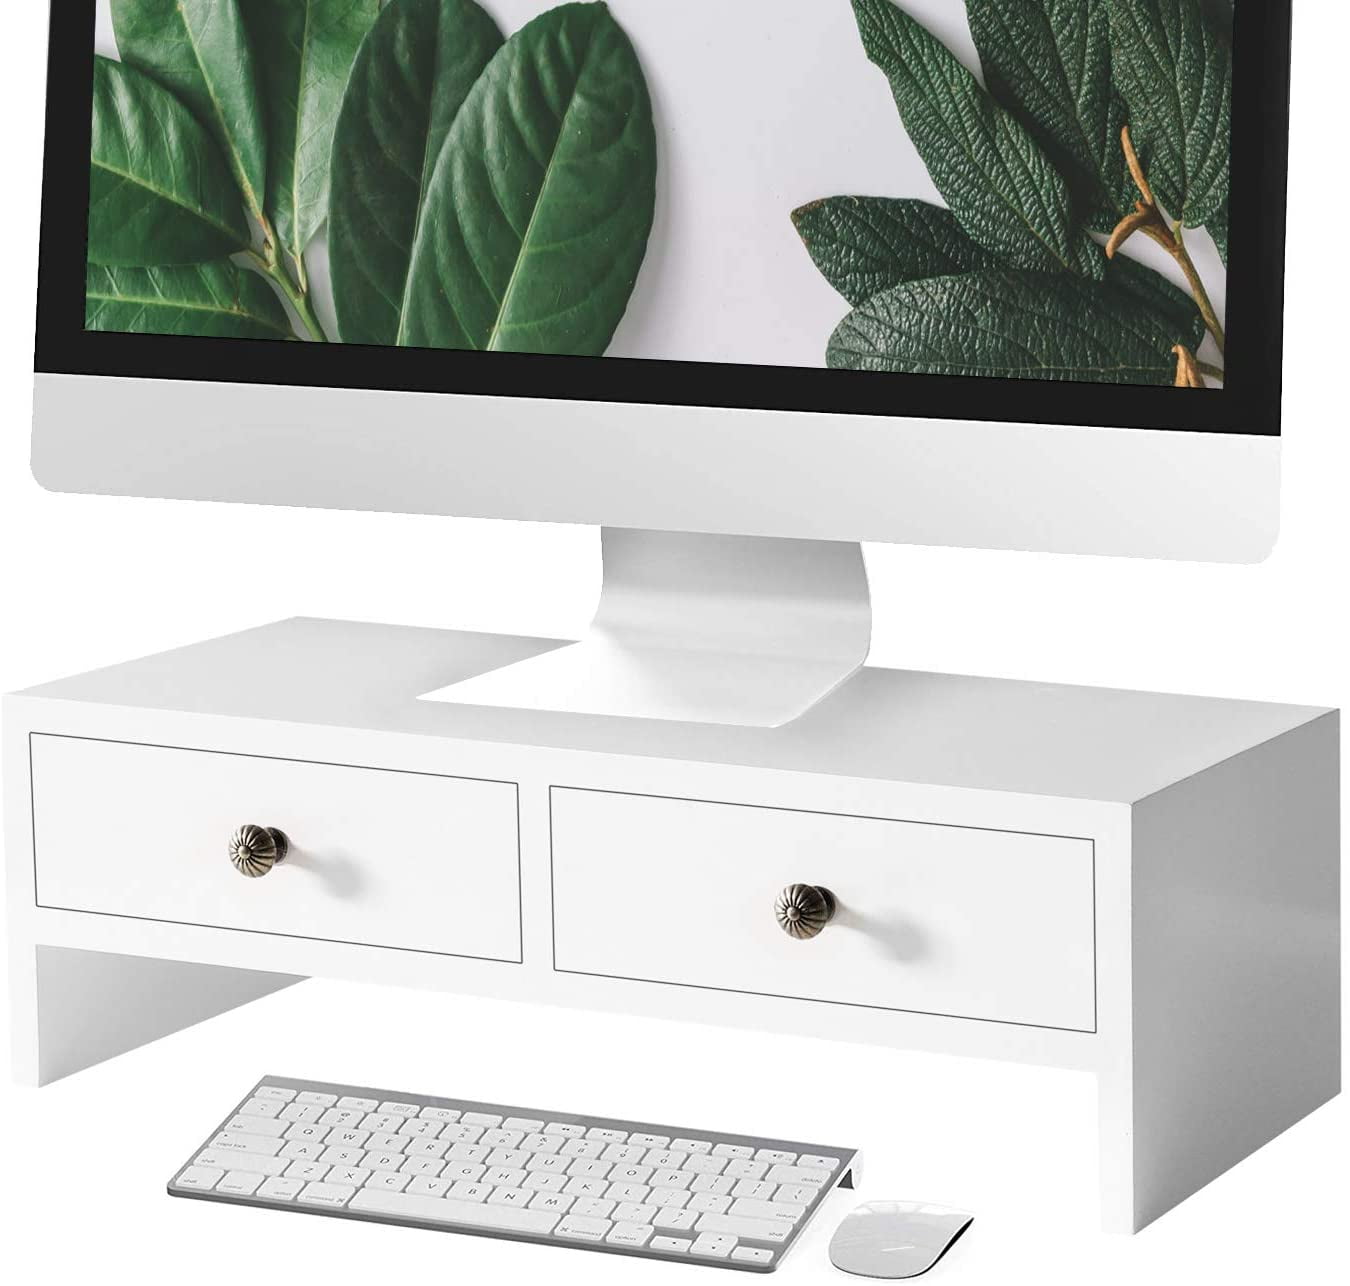 WELLAND Riser Monitor Stand with Drawers, Desktop Organizer Desk, Laptop or  PC Computer Stand, White Finish - Walmart.com